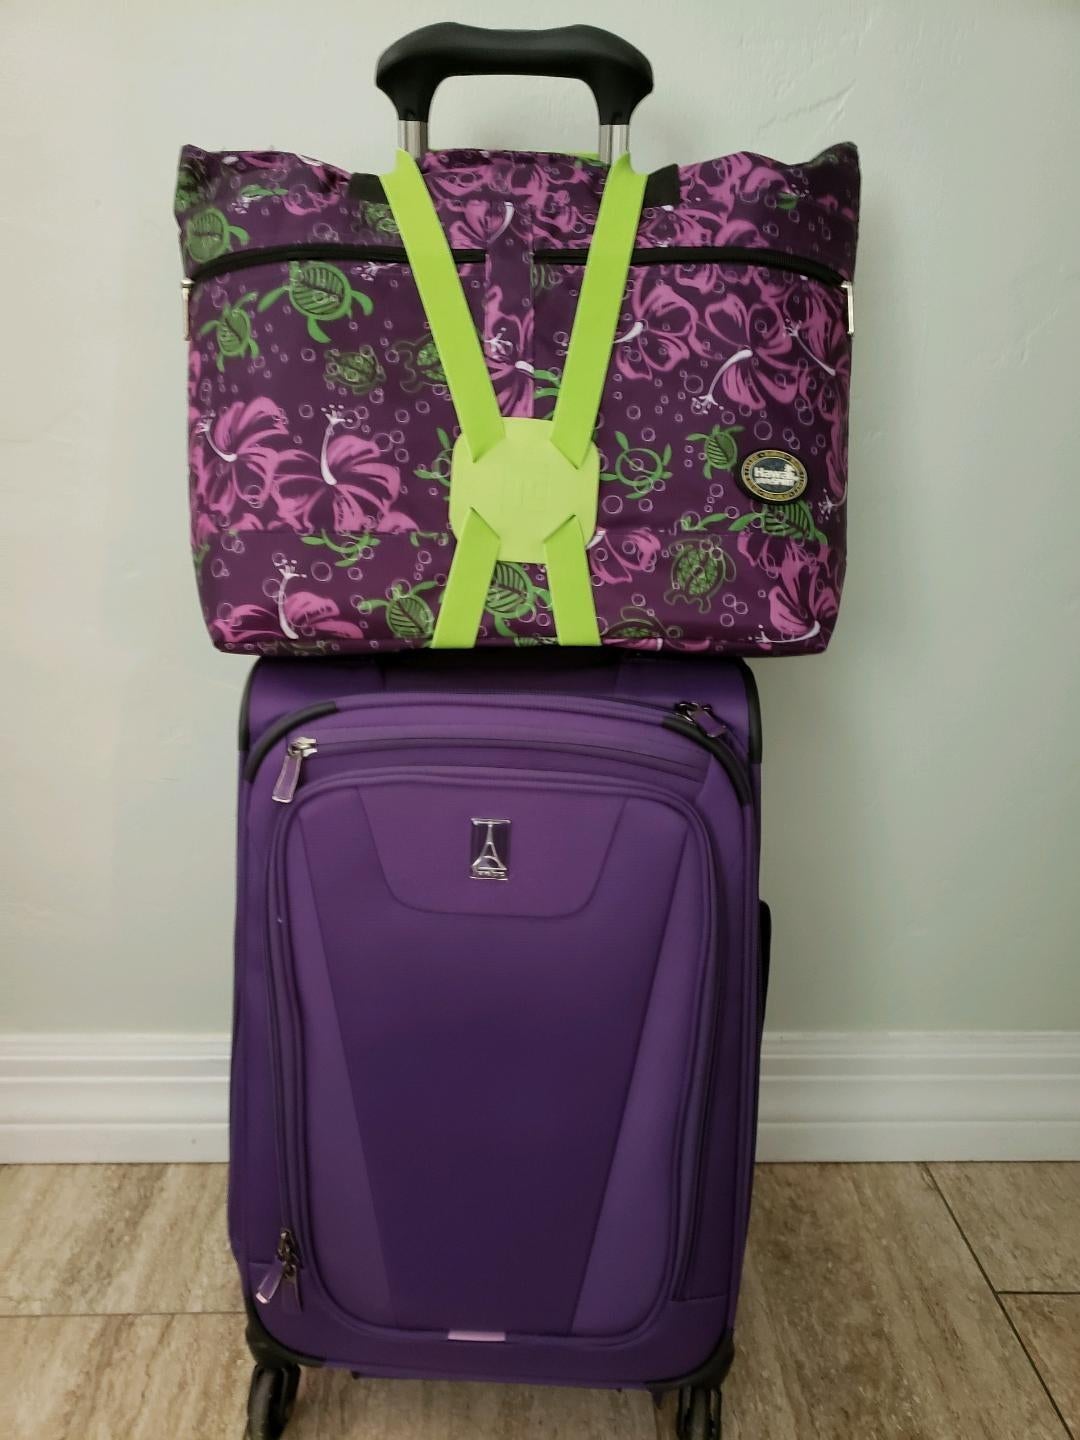 Reviewer photo of the lime green bungee cord holding a bag on top of a luggage